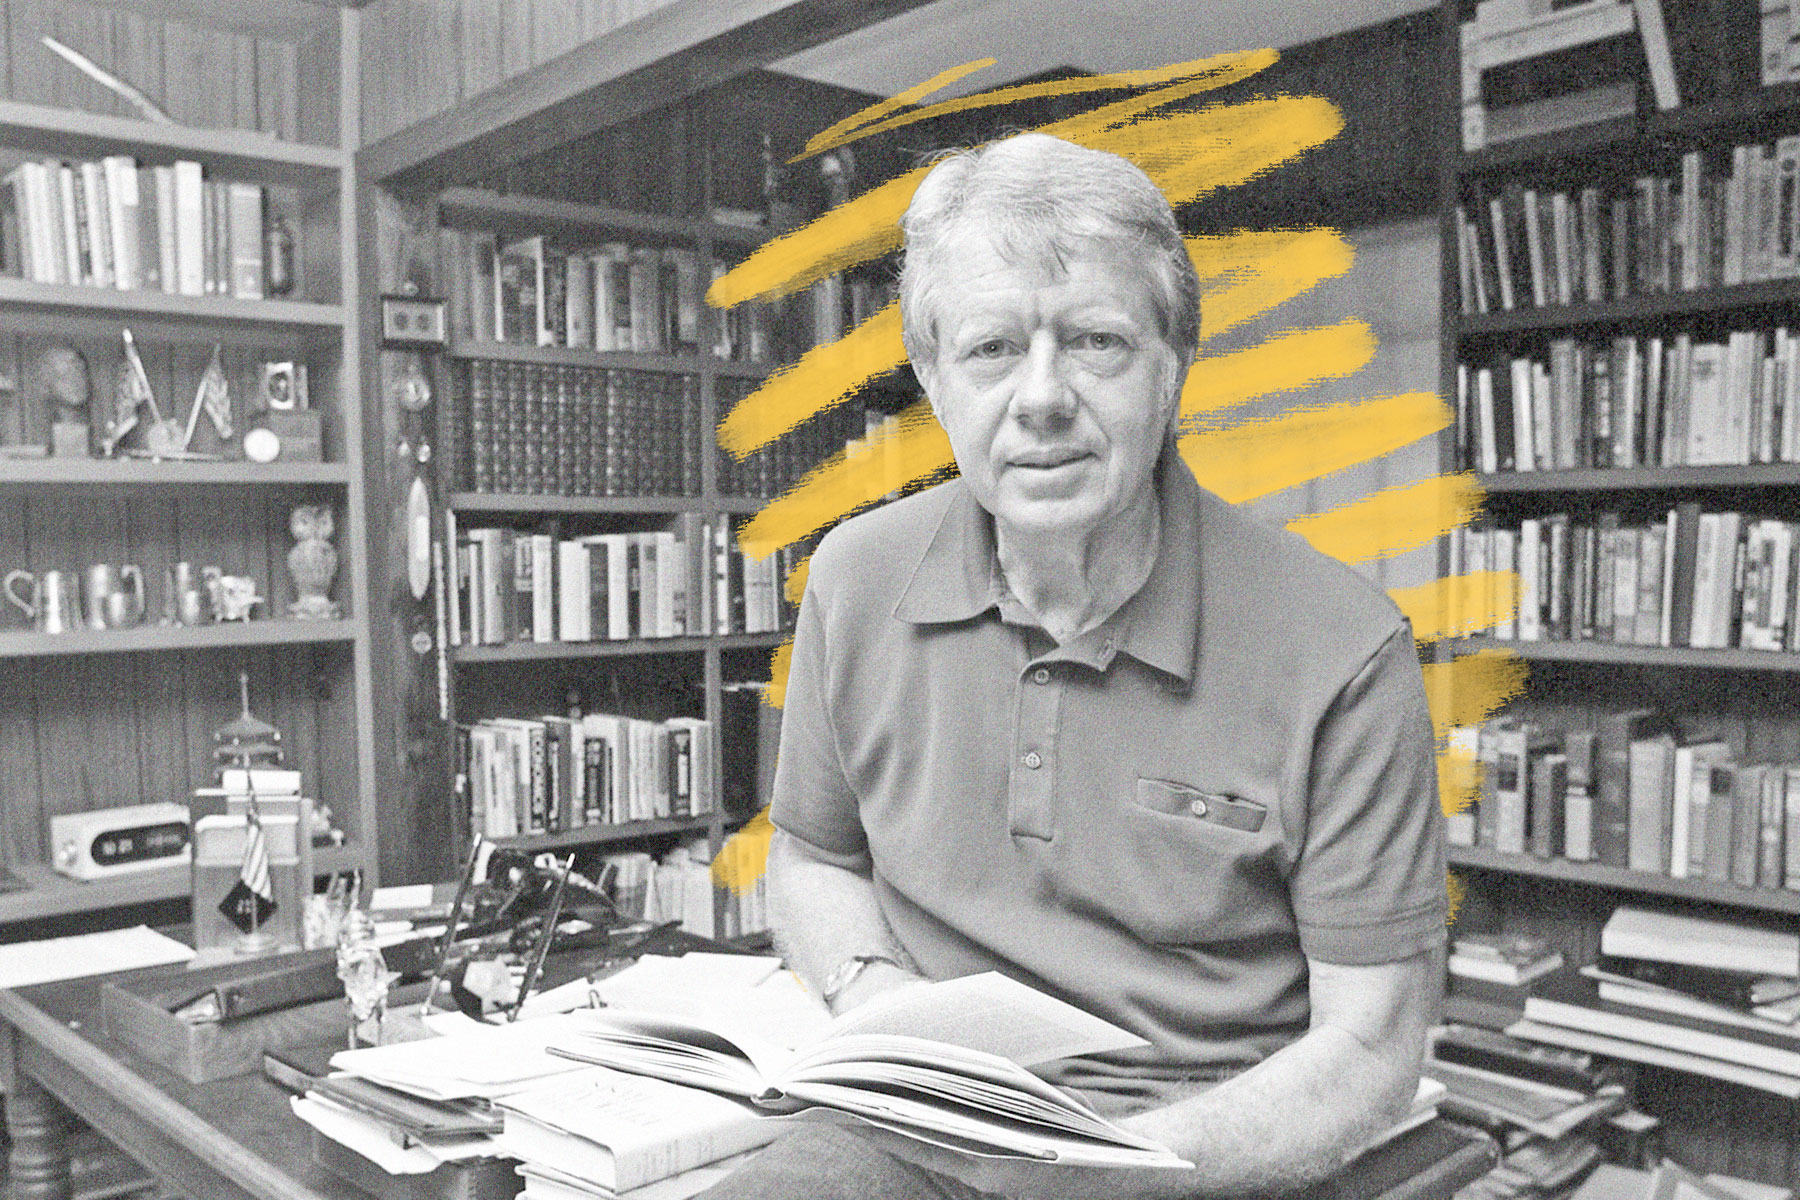 Jimmy Carter in his study